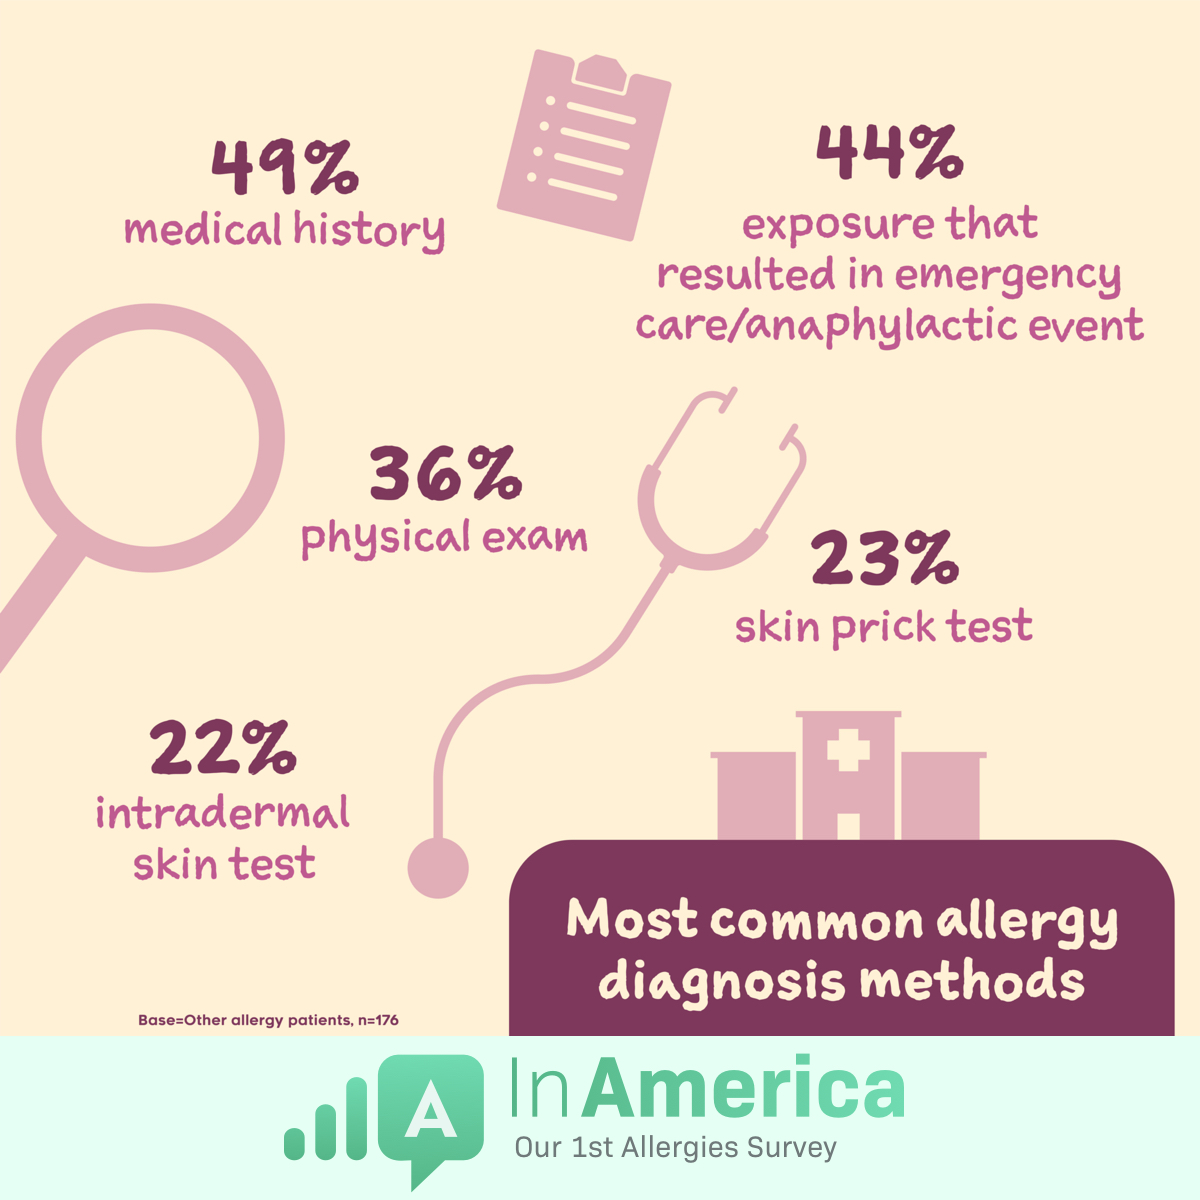 Common allergy diagnosis methods are medical history, skin tests, physical exams, and emergency exposures.